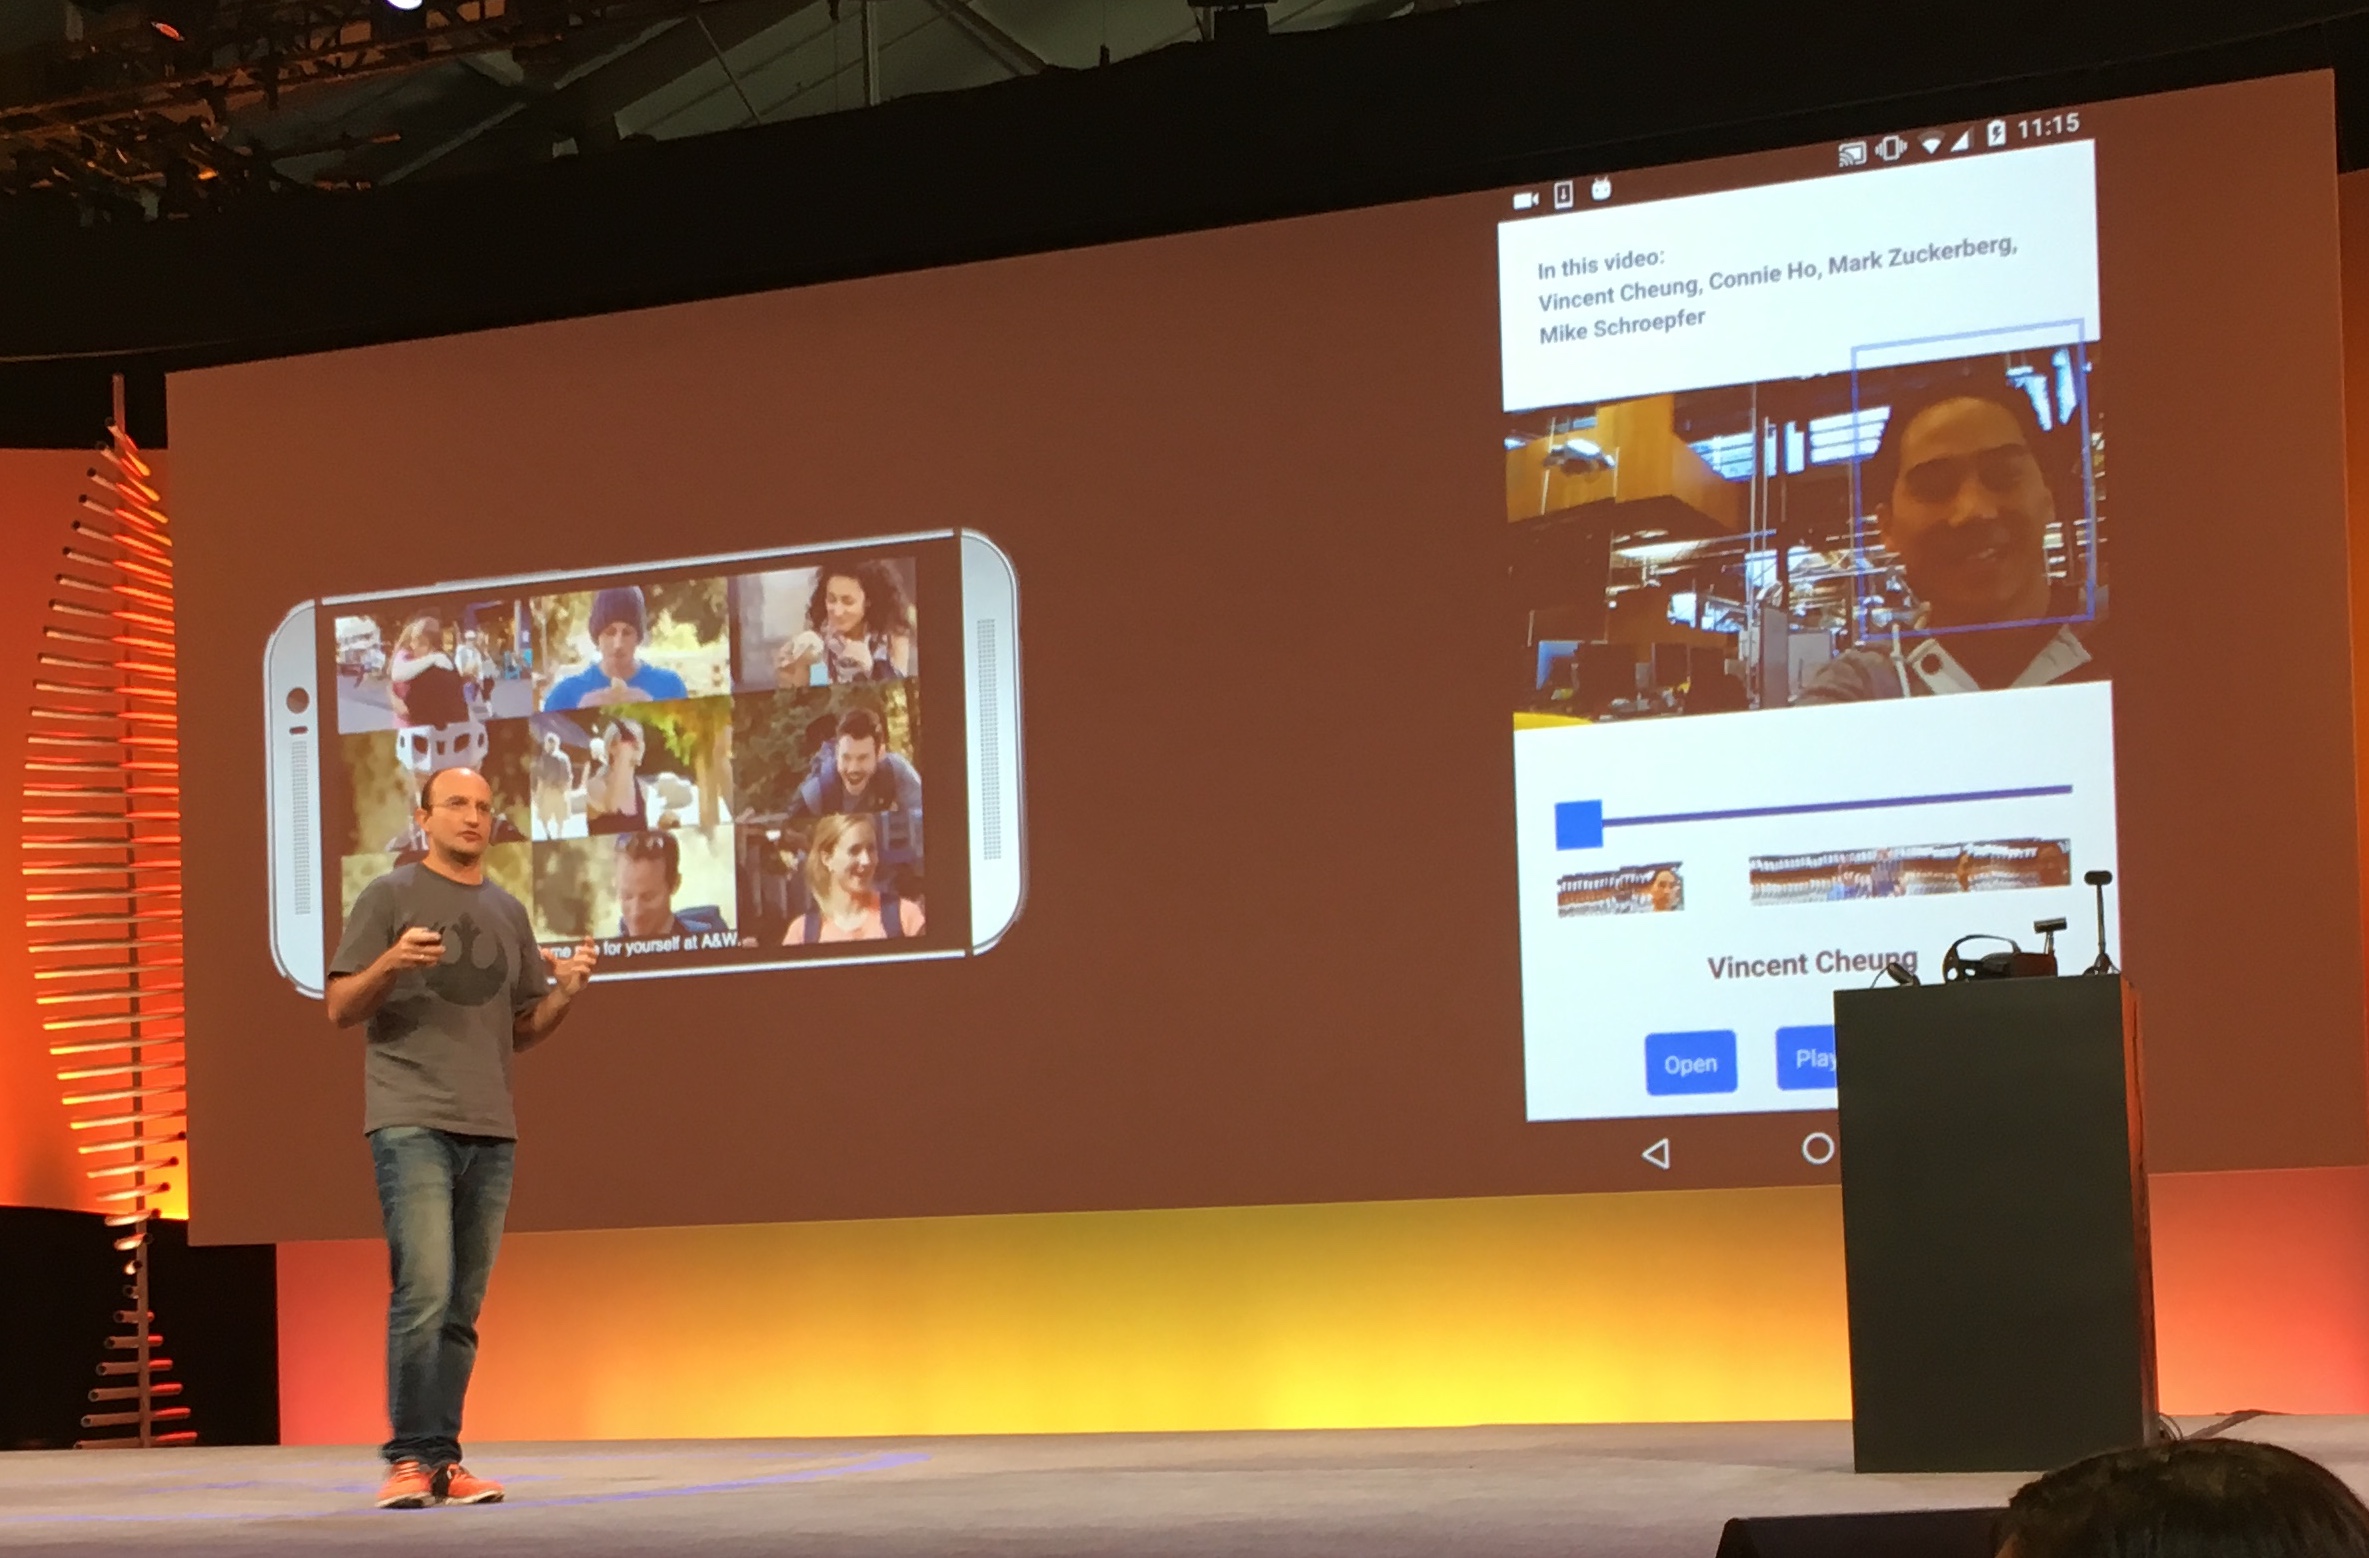 Joaquin Quiñonera Candela, Facebook's director of applied machine learning, talks about Facebook's latest AI research efforts around video at the company's F8 developer conference in San Francisco on April 13, 2016.